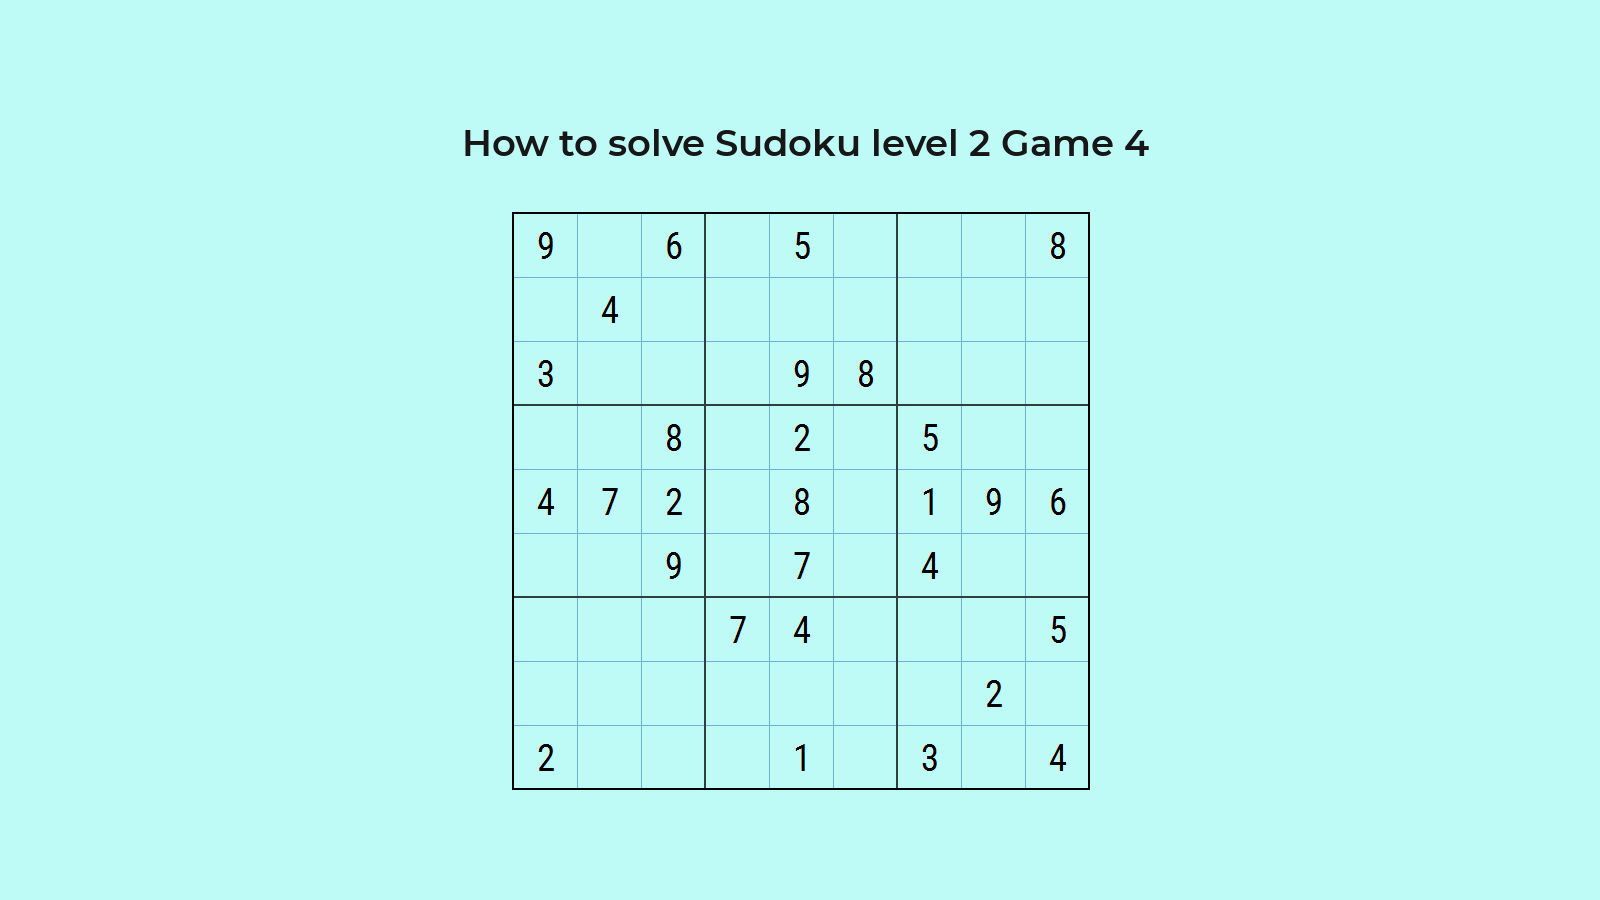 How to solve Sudoku level 2 Game 4